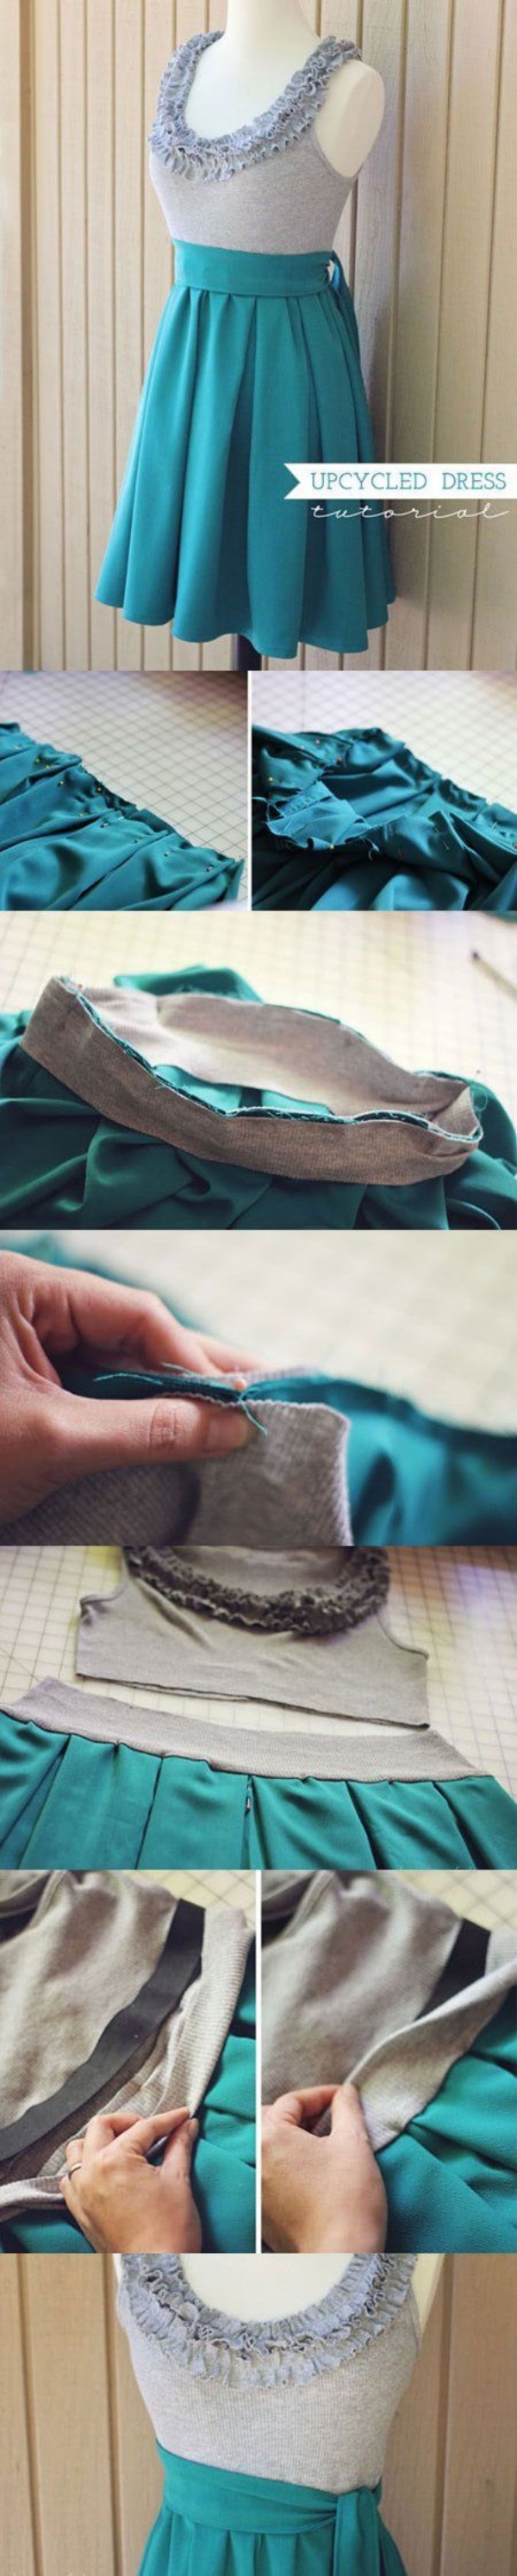 Smart-Refashion-Ideas-to-Upcycle-Outdated-Clothes2